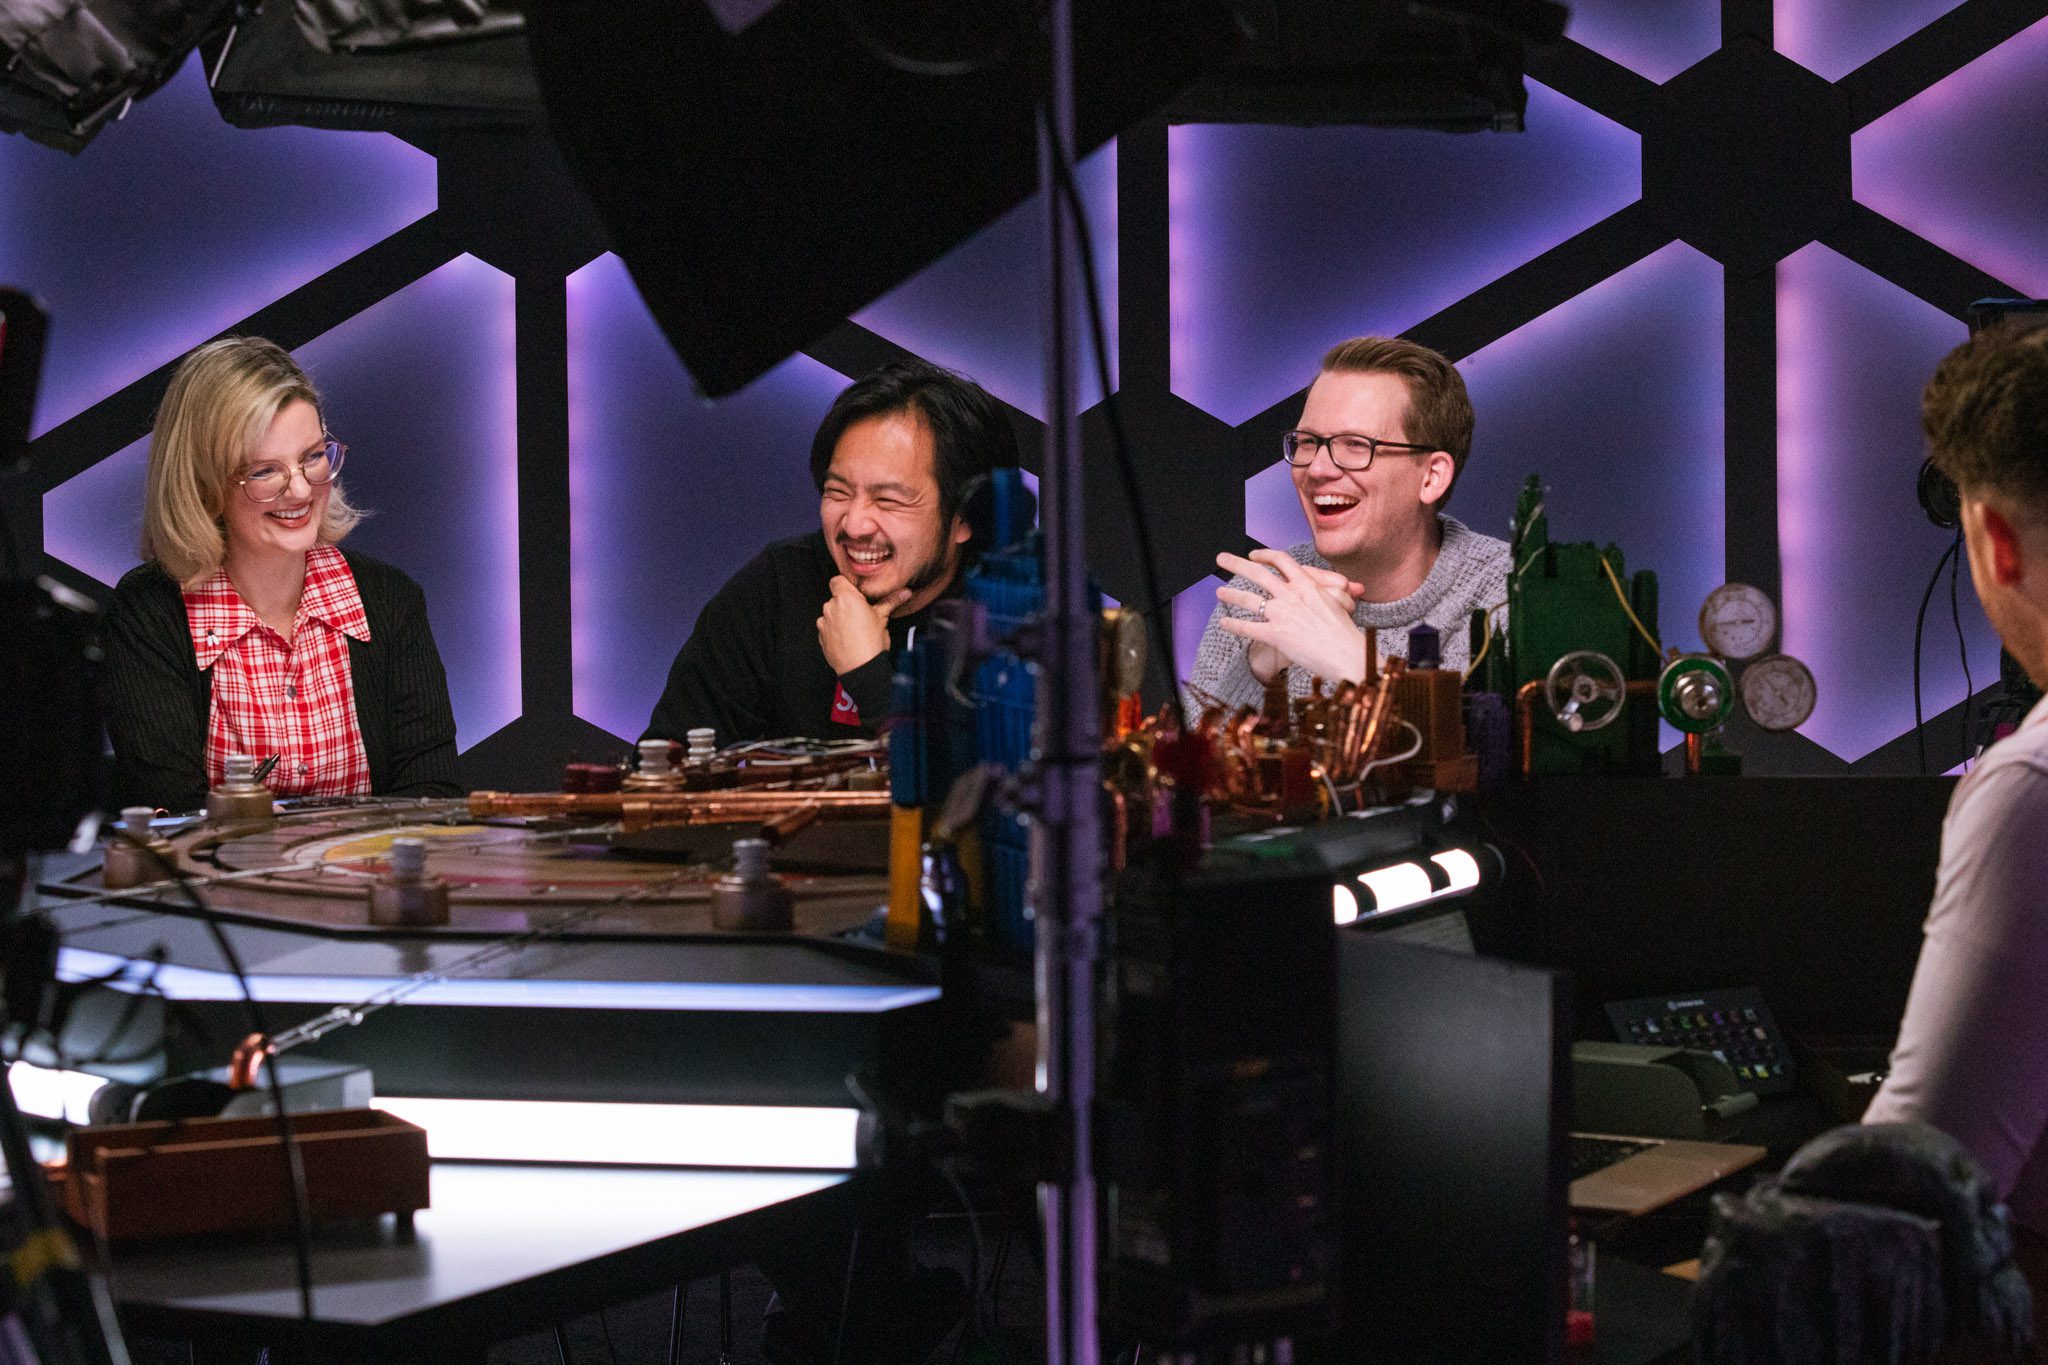 The cast of mentopolis at the table. From left to right: Siobhan Thompson, Freddie Wong, and Hank Green